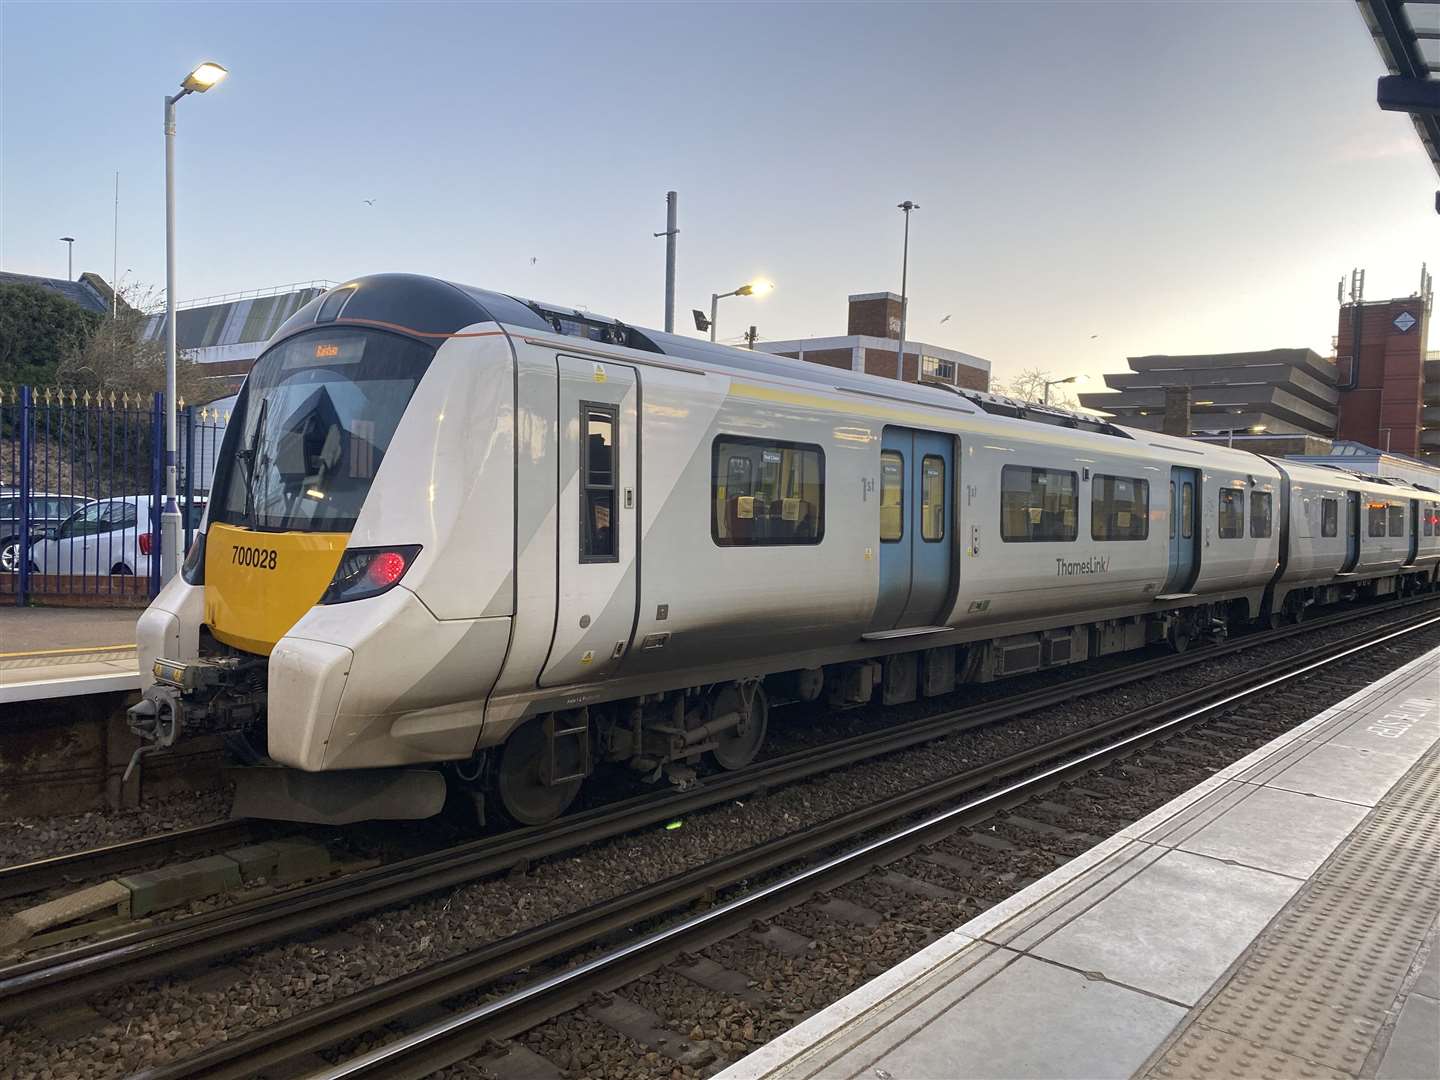 Thameslink services were temporarily suspended at Gravesend this morning